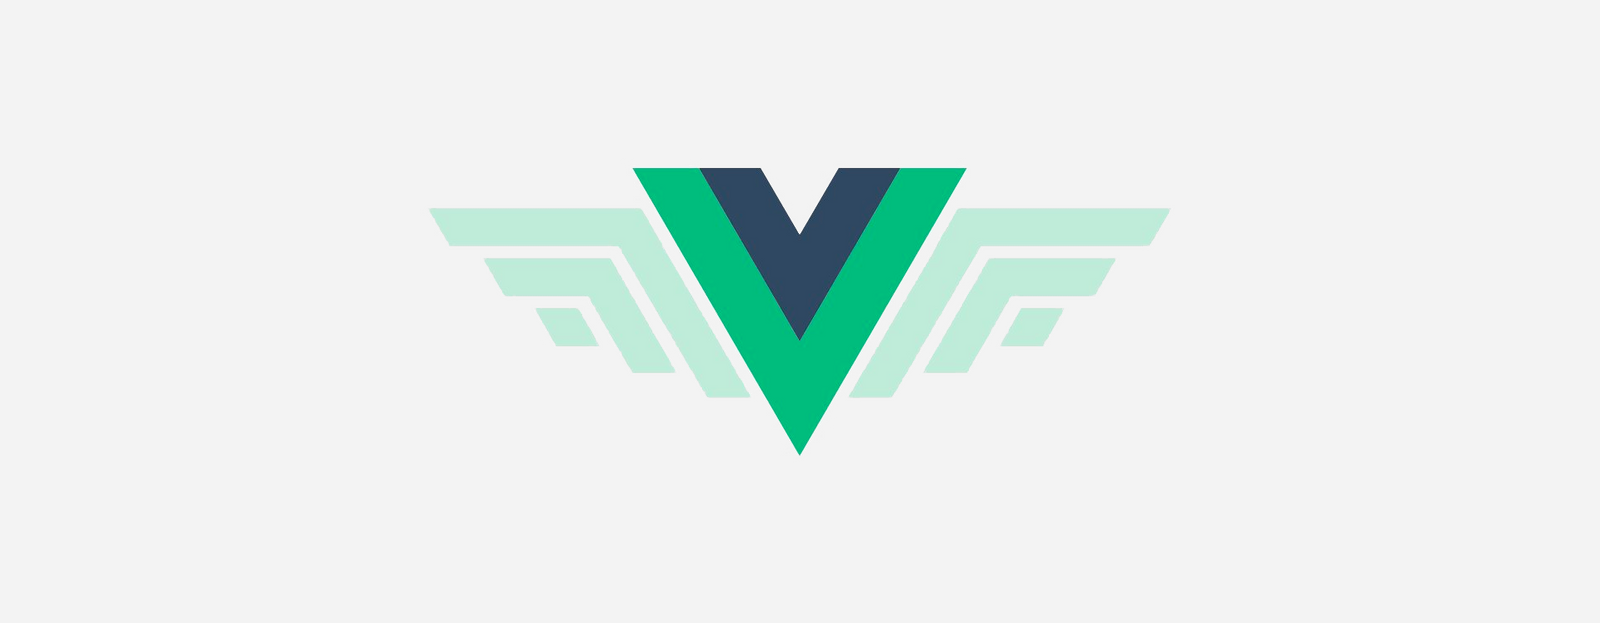 Top Vue Packages for Lazy Loading Image, Handling Keyboard Shortcut and More